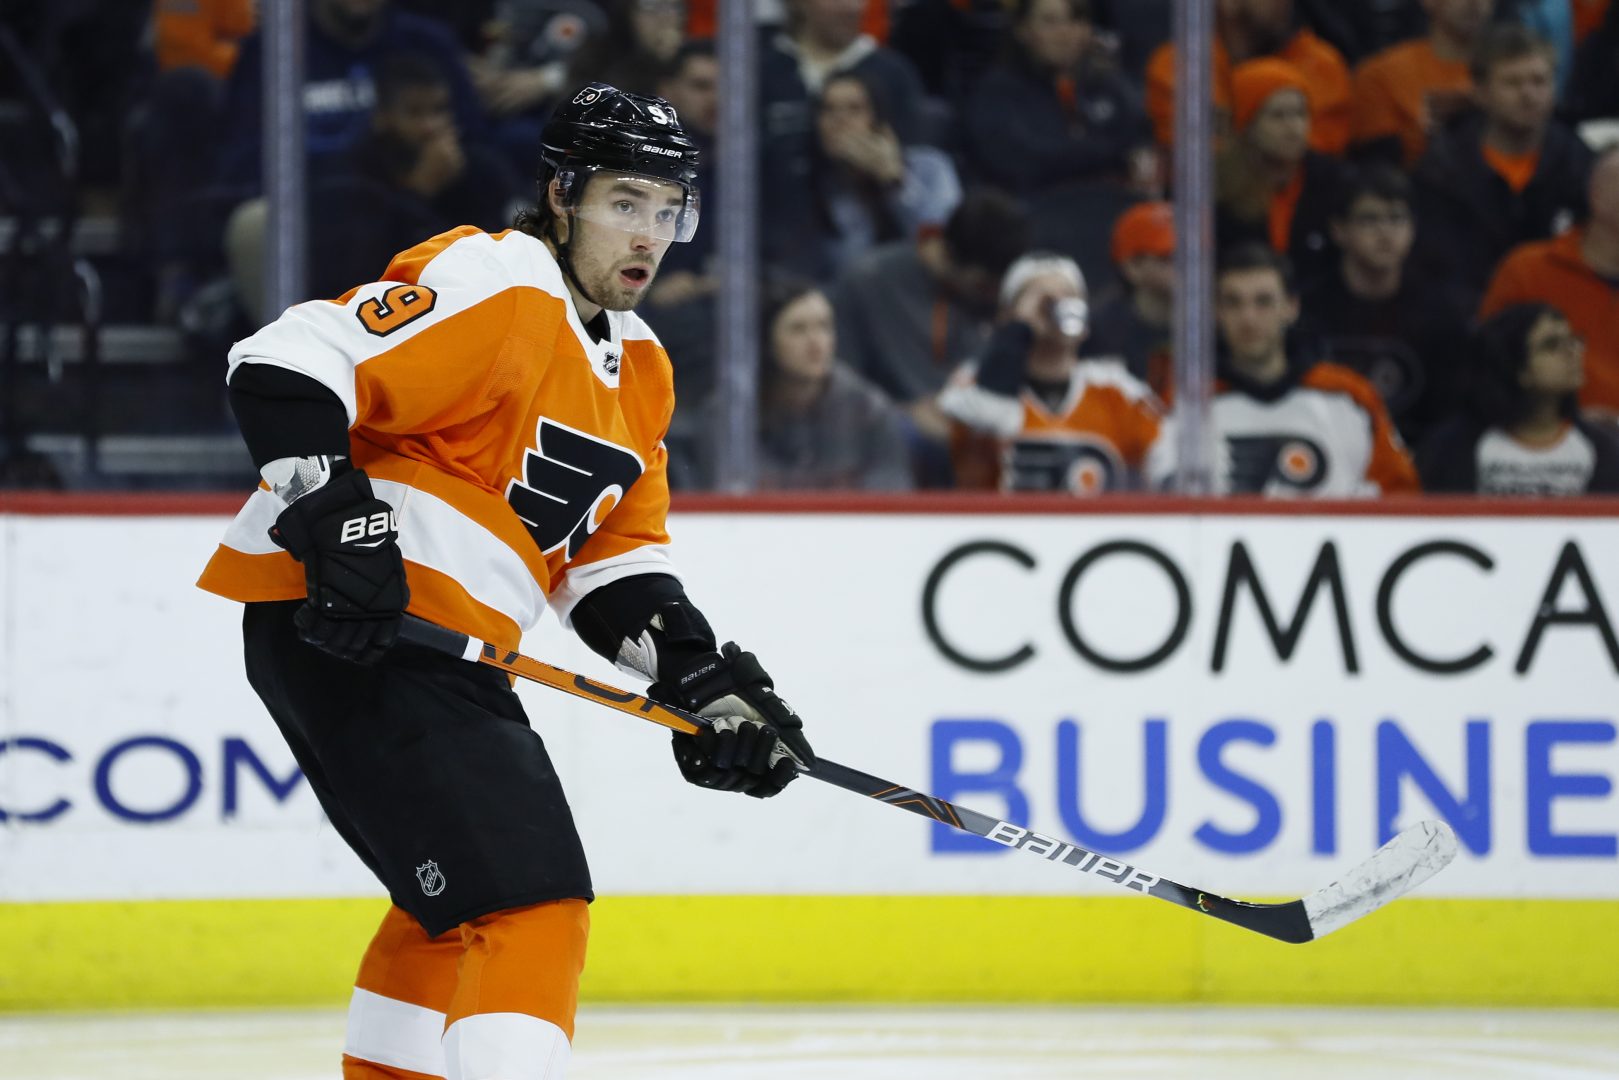 Travis Konecny making strong case for sticking with Flyers